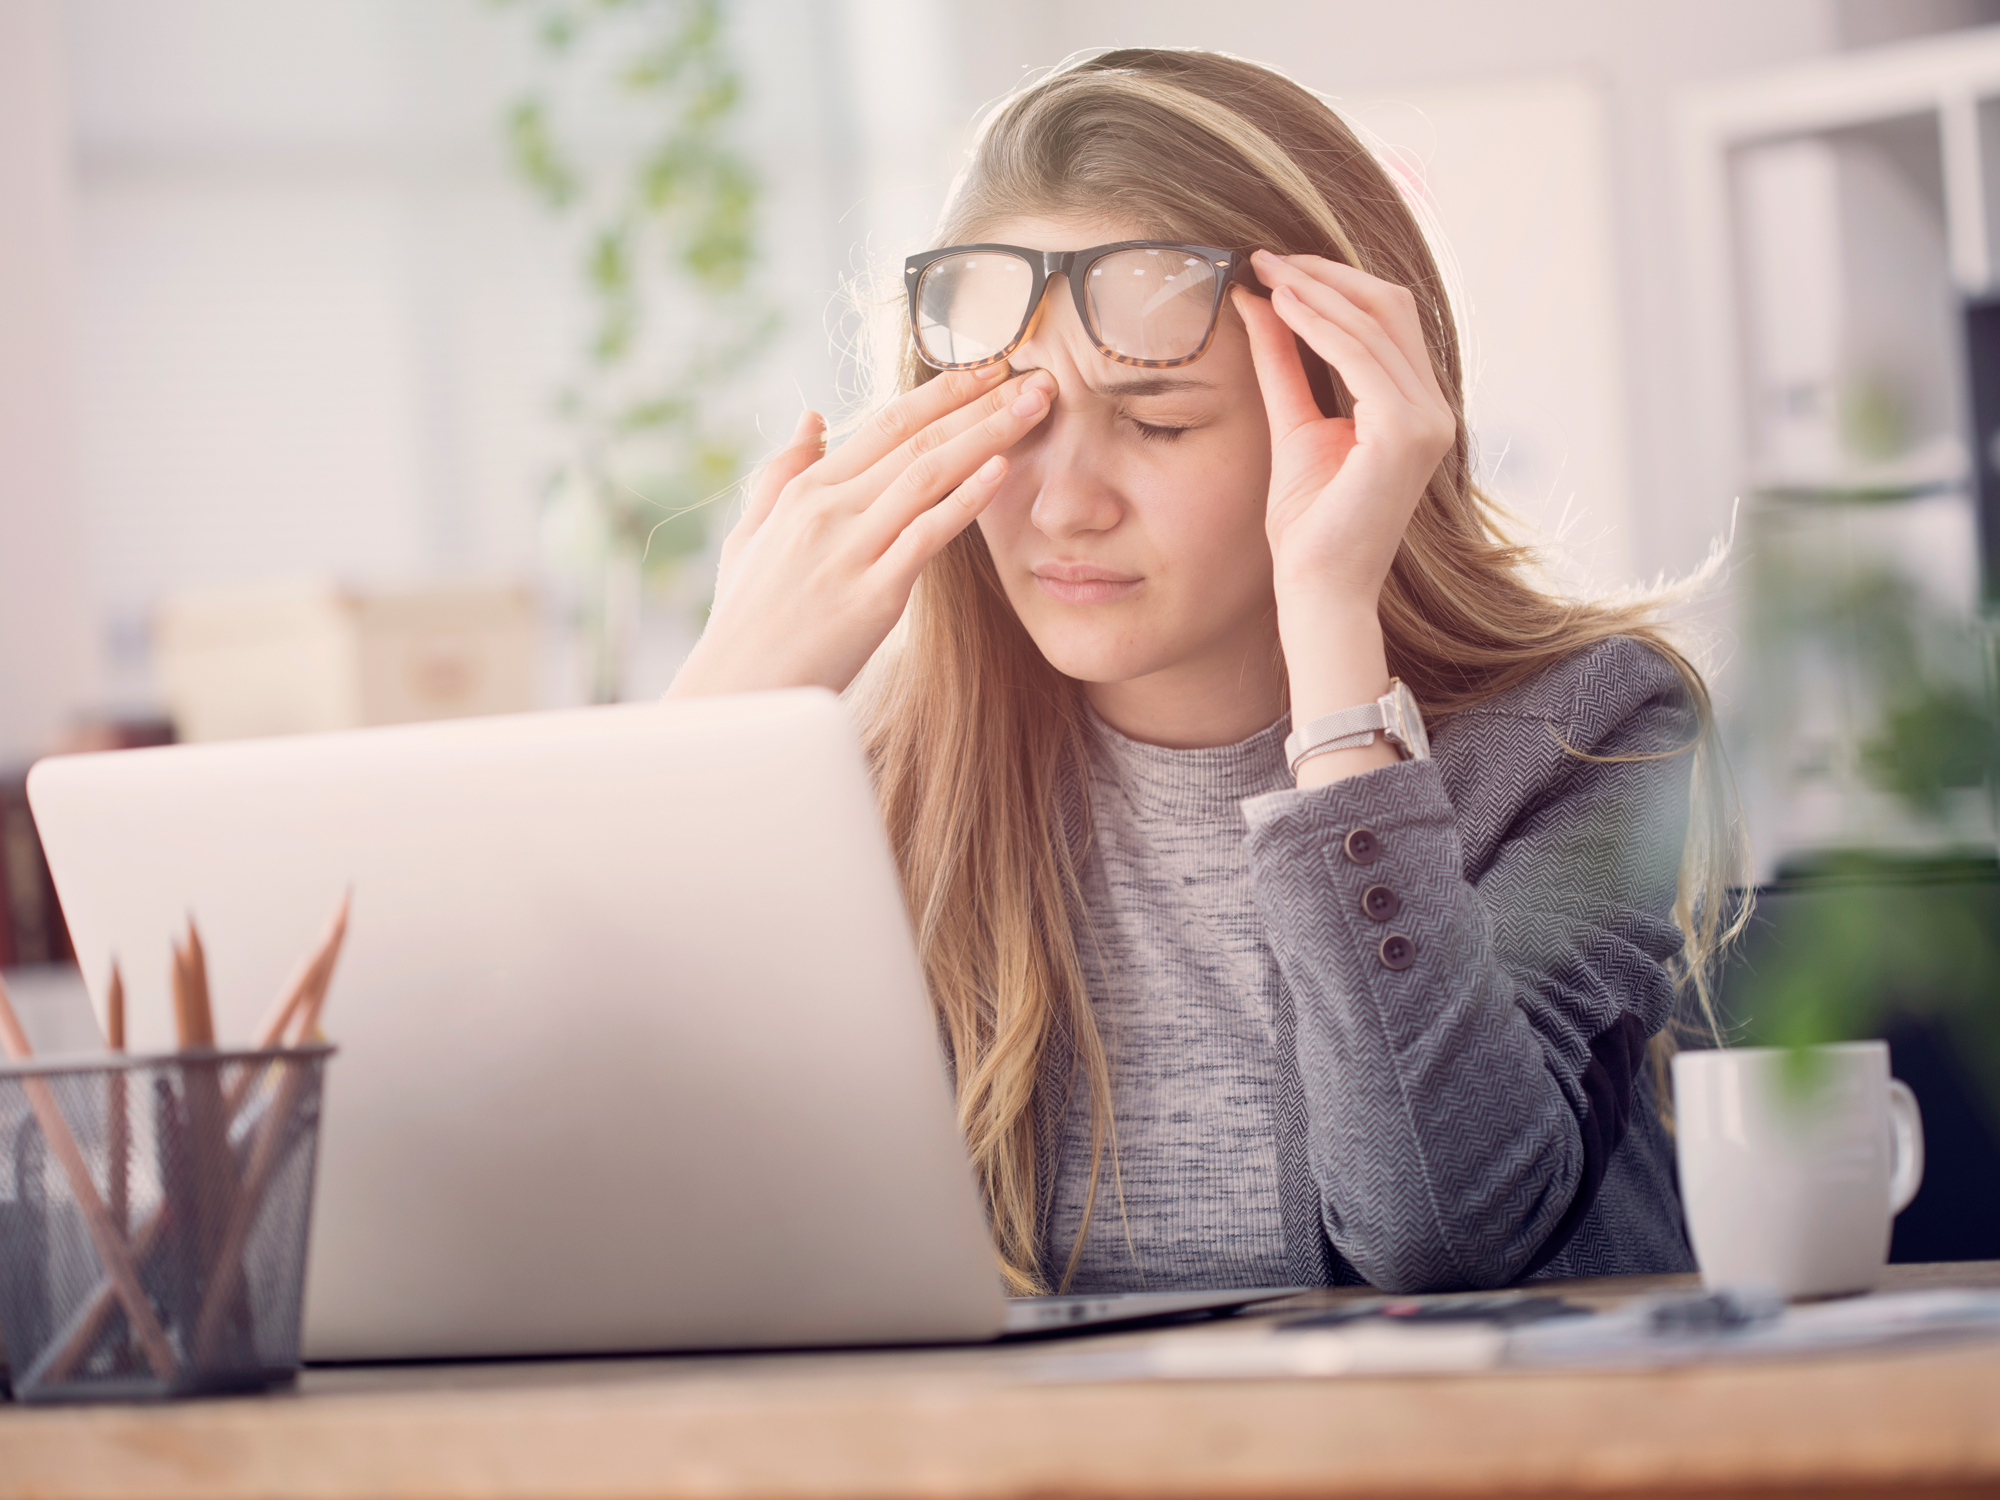 Treating this common eye condition might cure your migraines